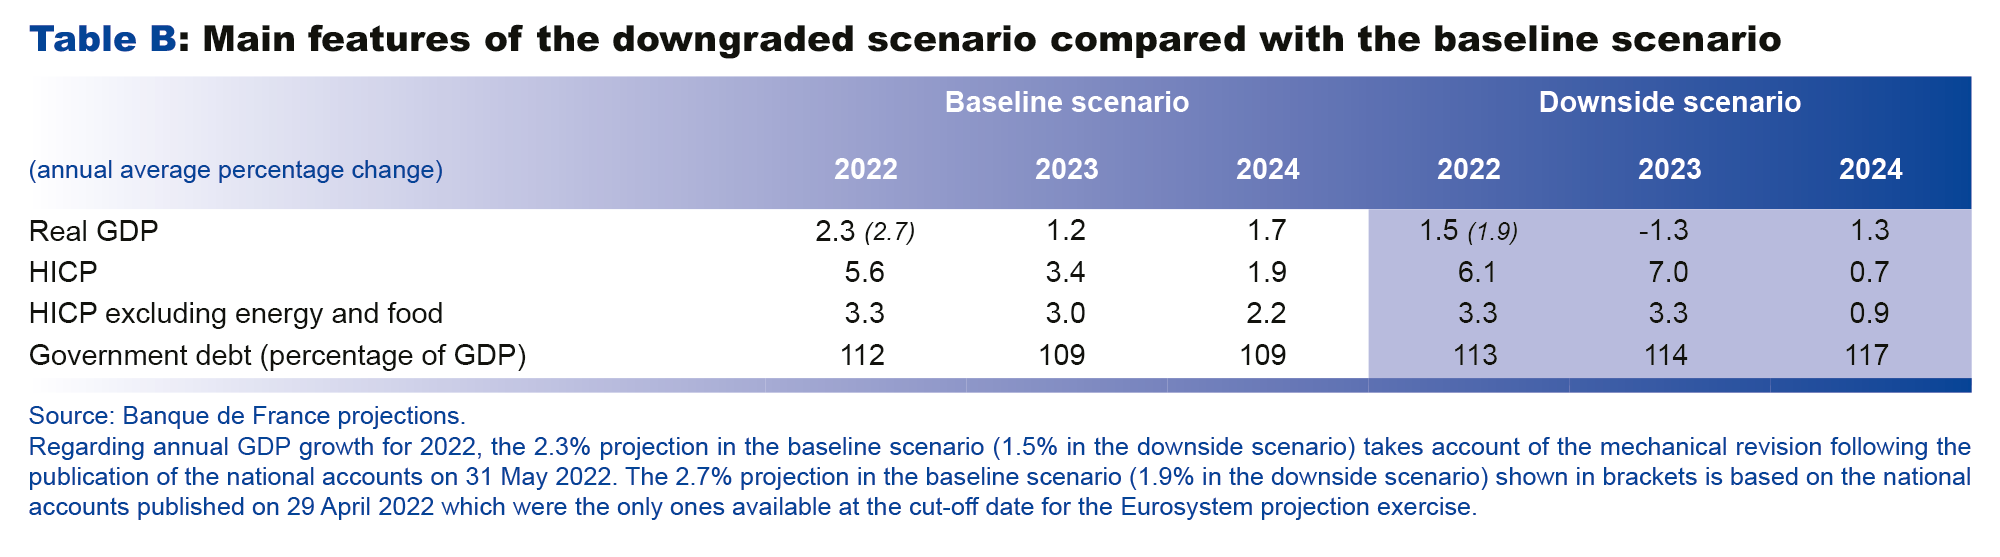 Macroeconomic projections – June 2022 - Main features of the downgraded scenario compared with the baseline scenario